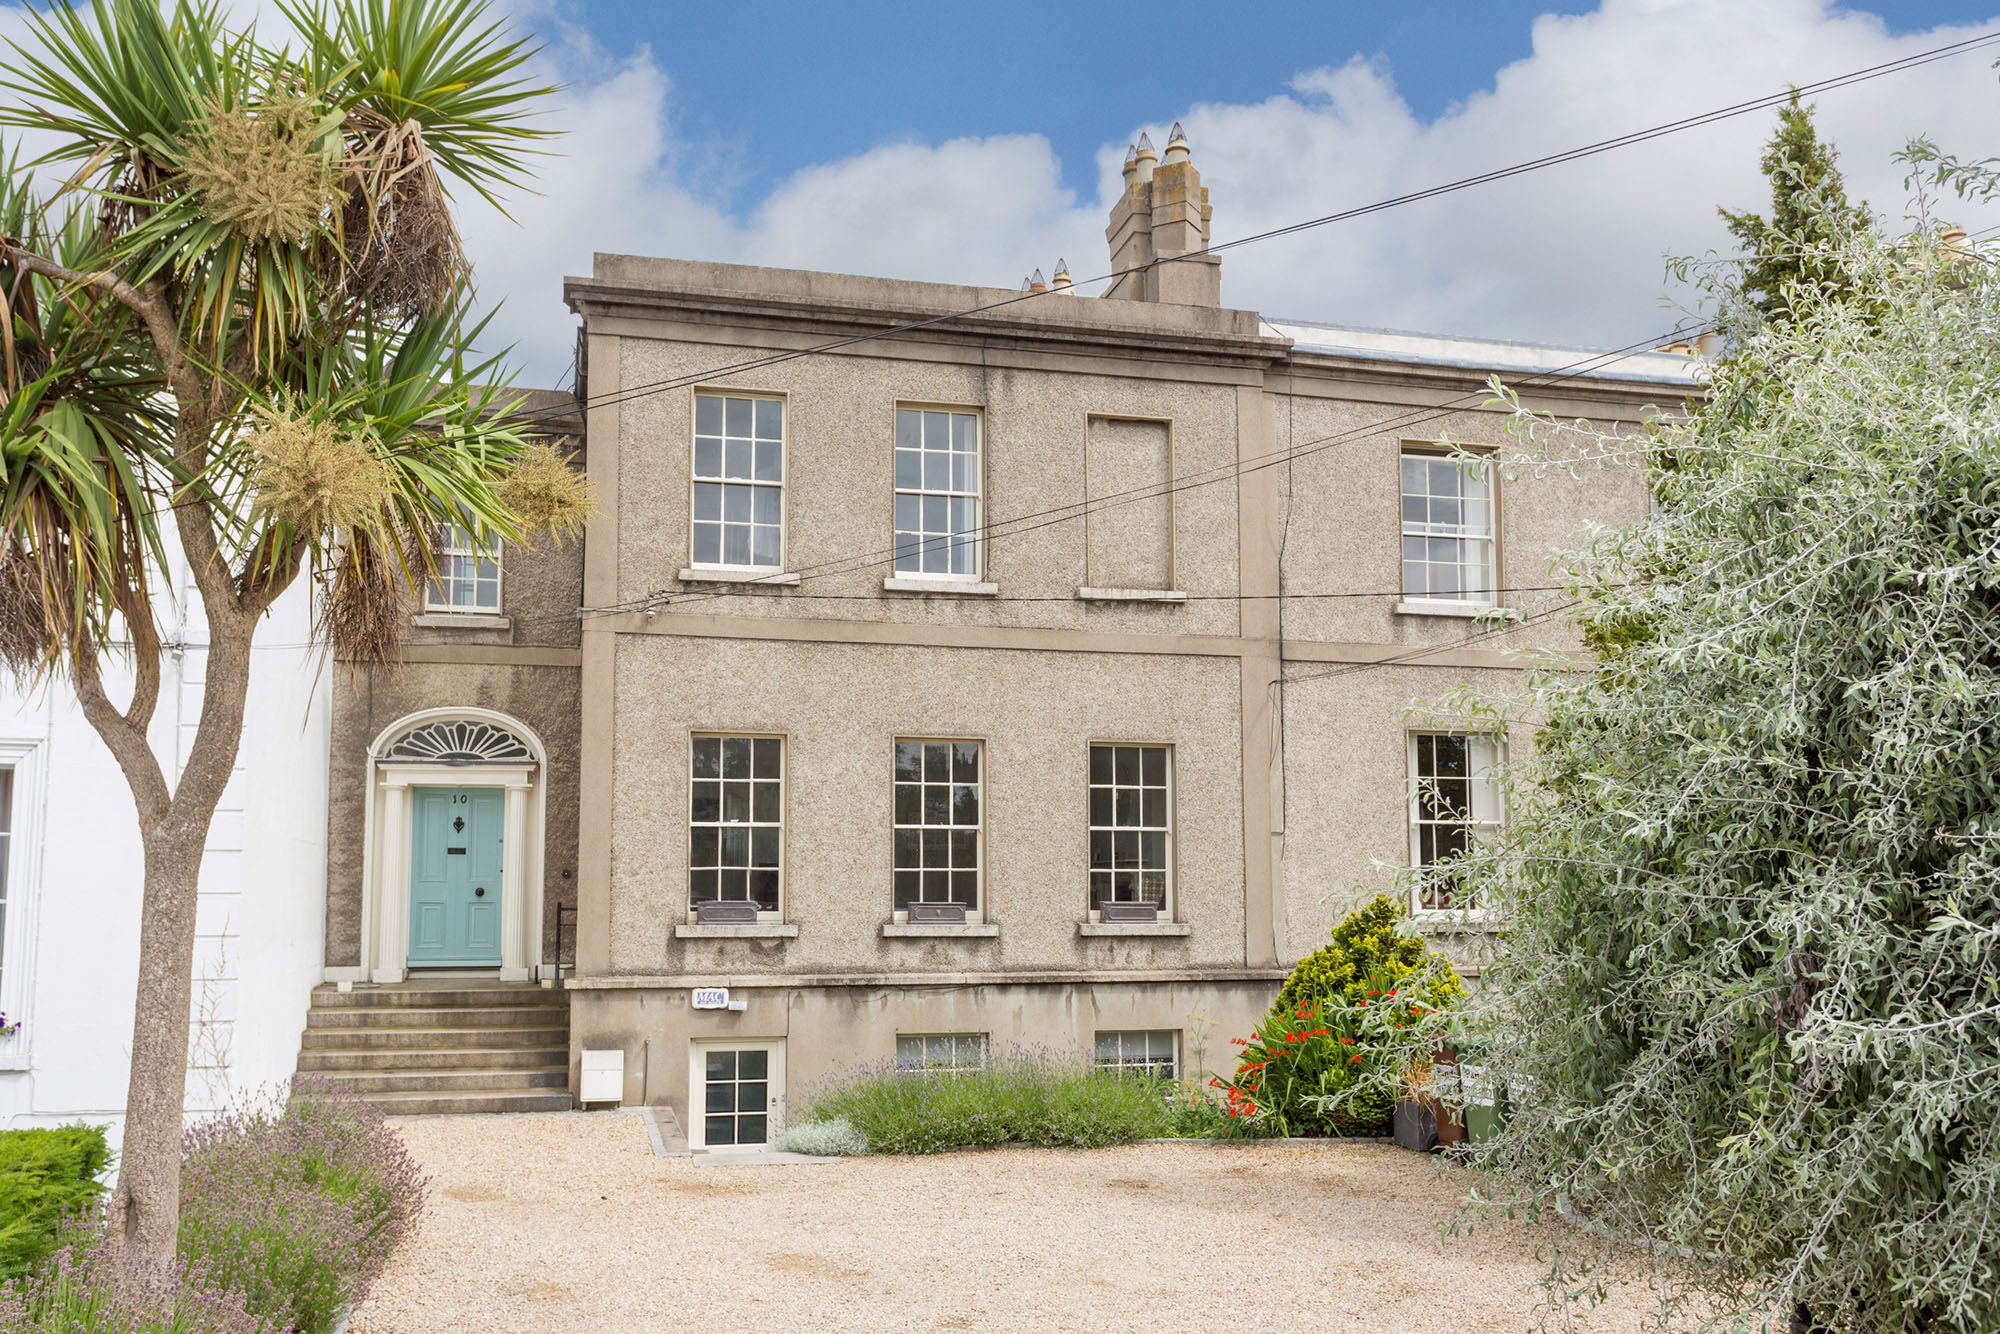 Prince Edward Terrace : Five dazzling homes for sale in Dublin